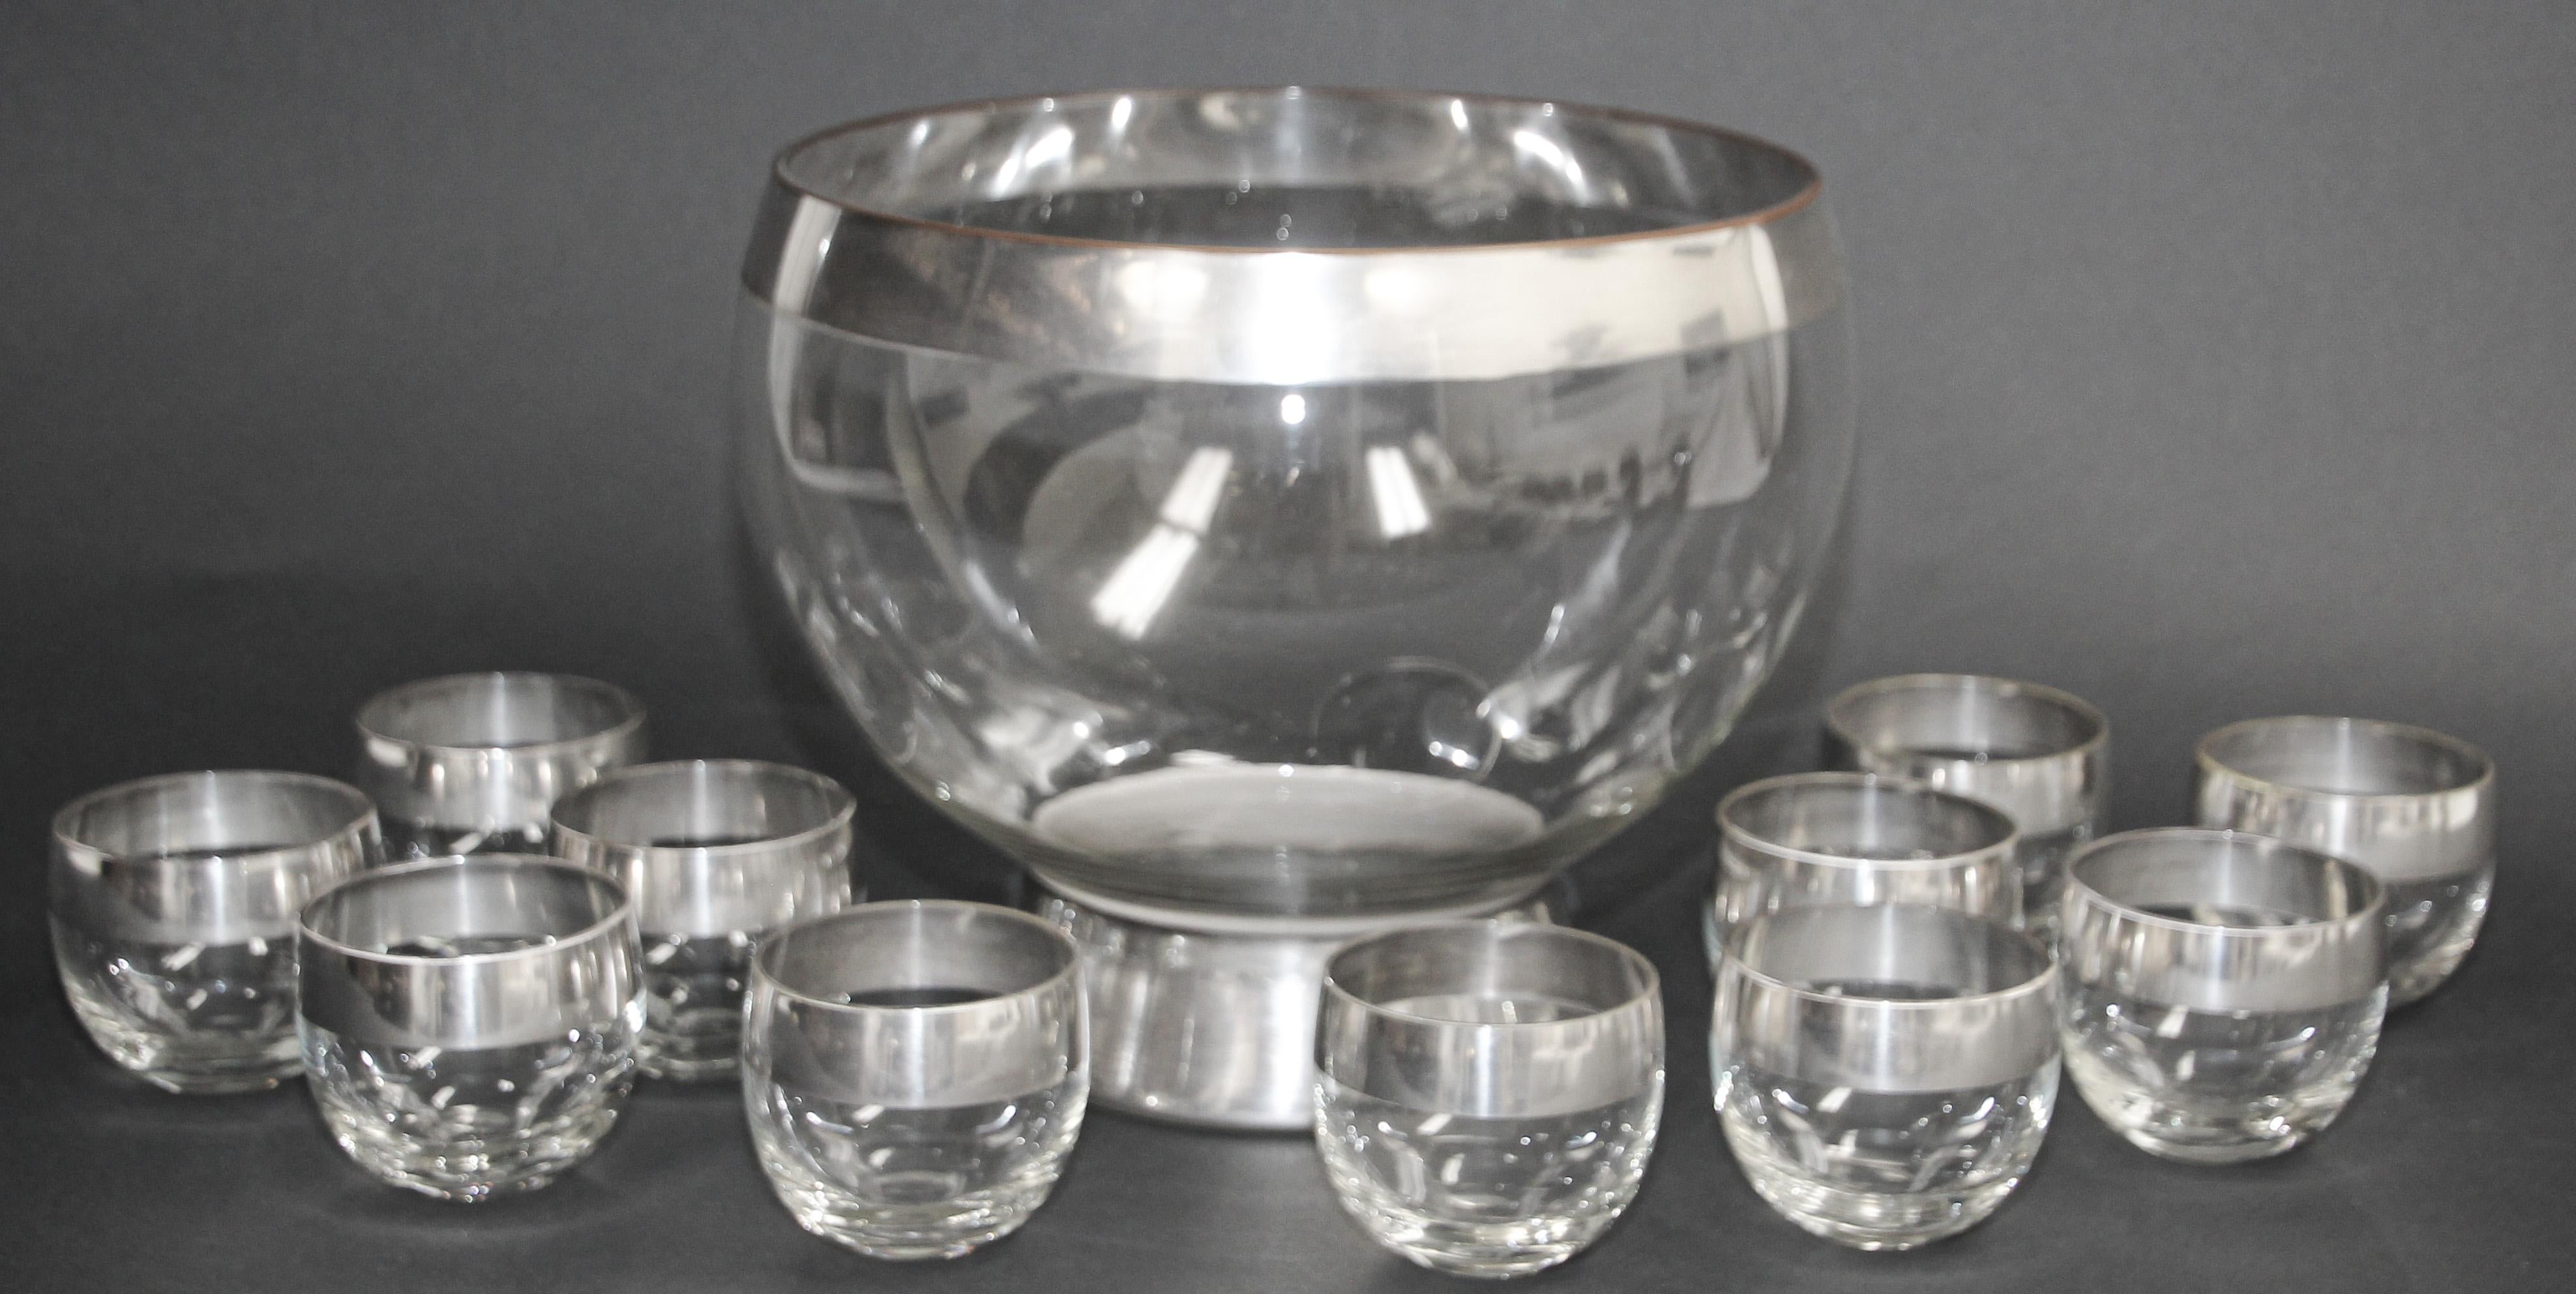 Midcentury Dorothy Thorpe style silver rimmed punch bowl and roly poly glasses, set of twelve
Vintage 1960s attributed to Dorothy Thorpe midcentury barware set of 11 glasses and one punch bowl.
Elegant exquisite vintage 1950s Designer Dorothy Thorpe